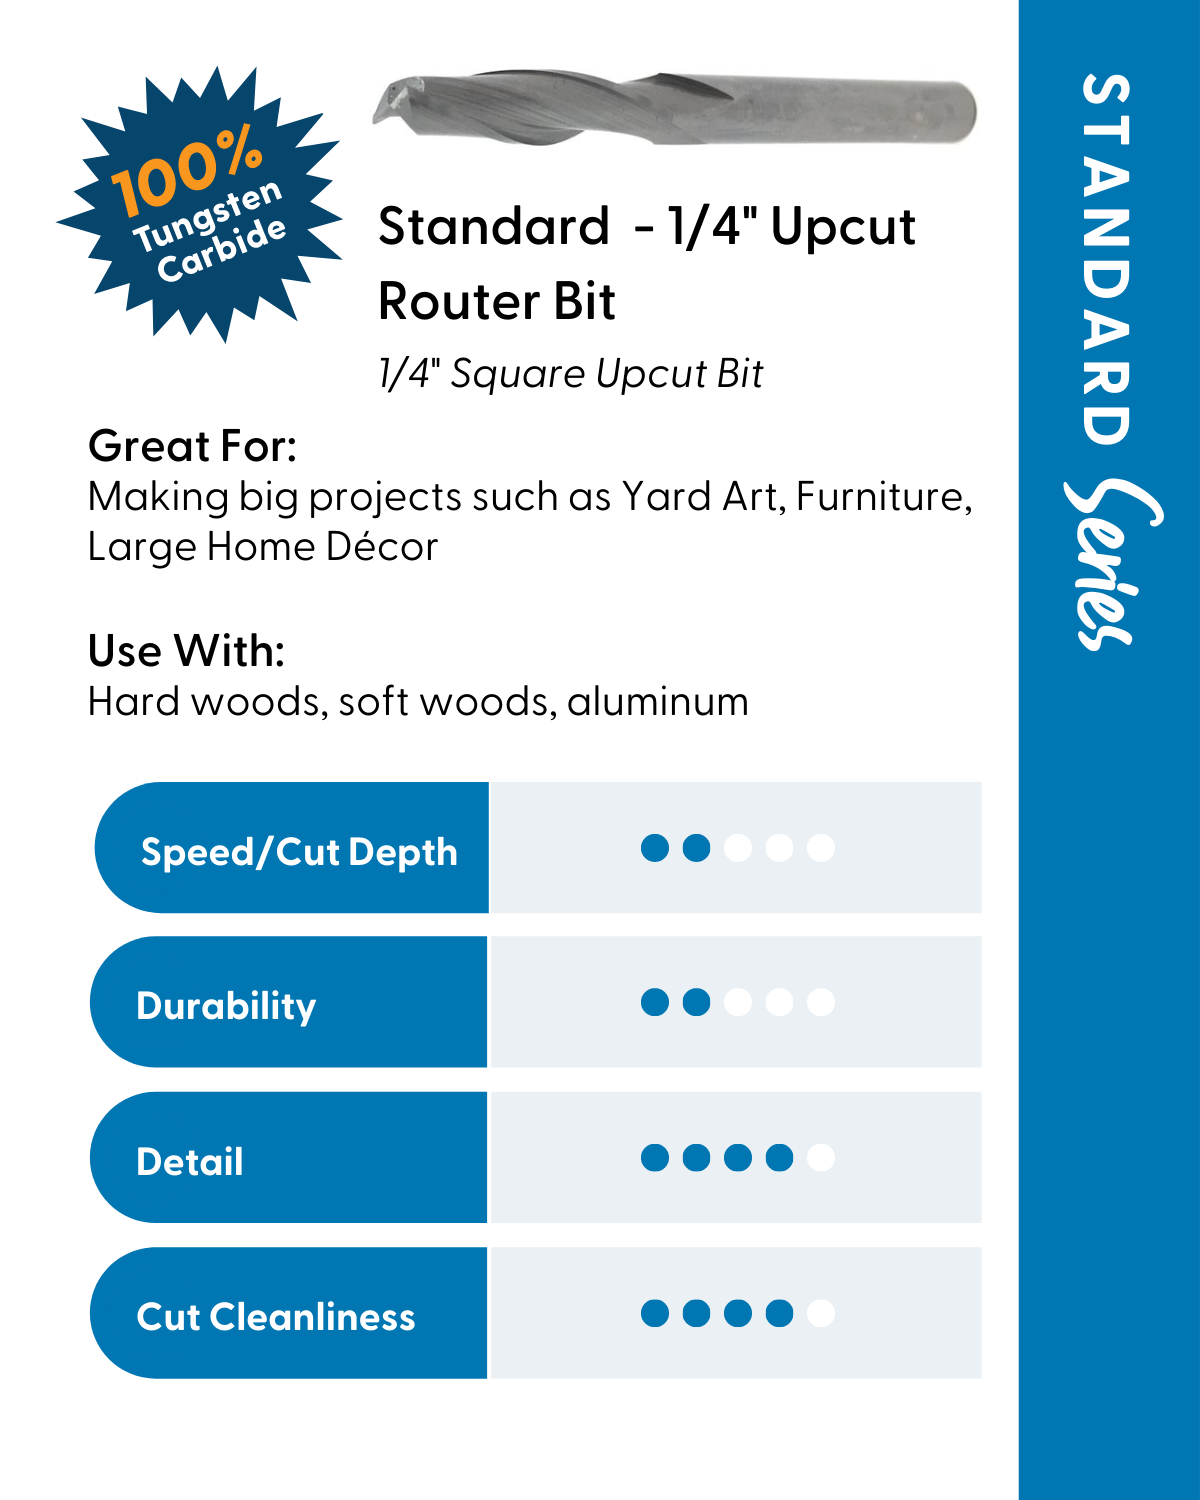 More details about Standard 1/4" Upcut Router Bit